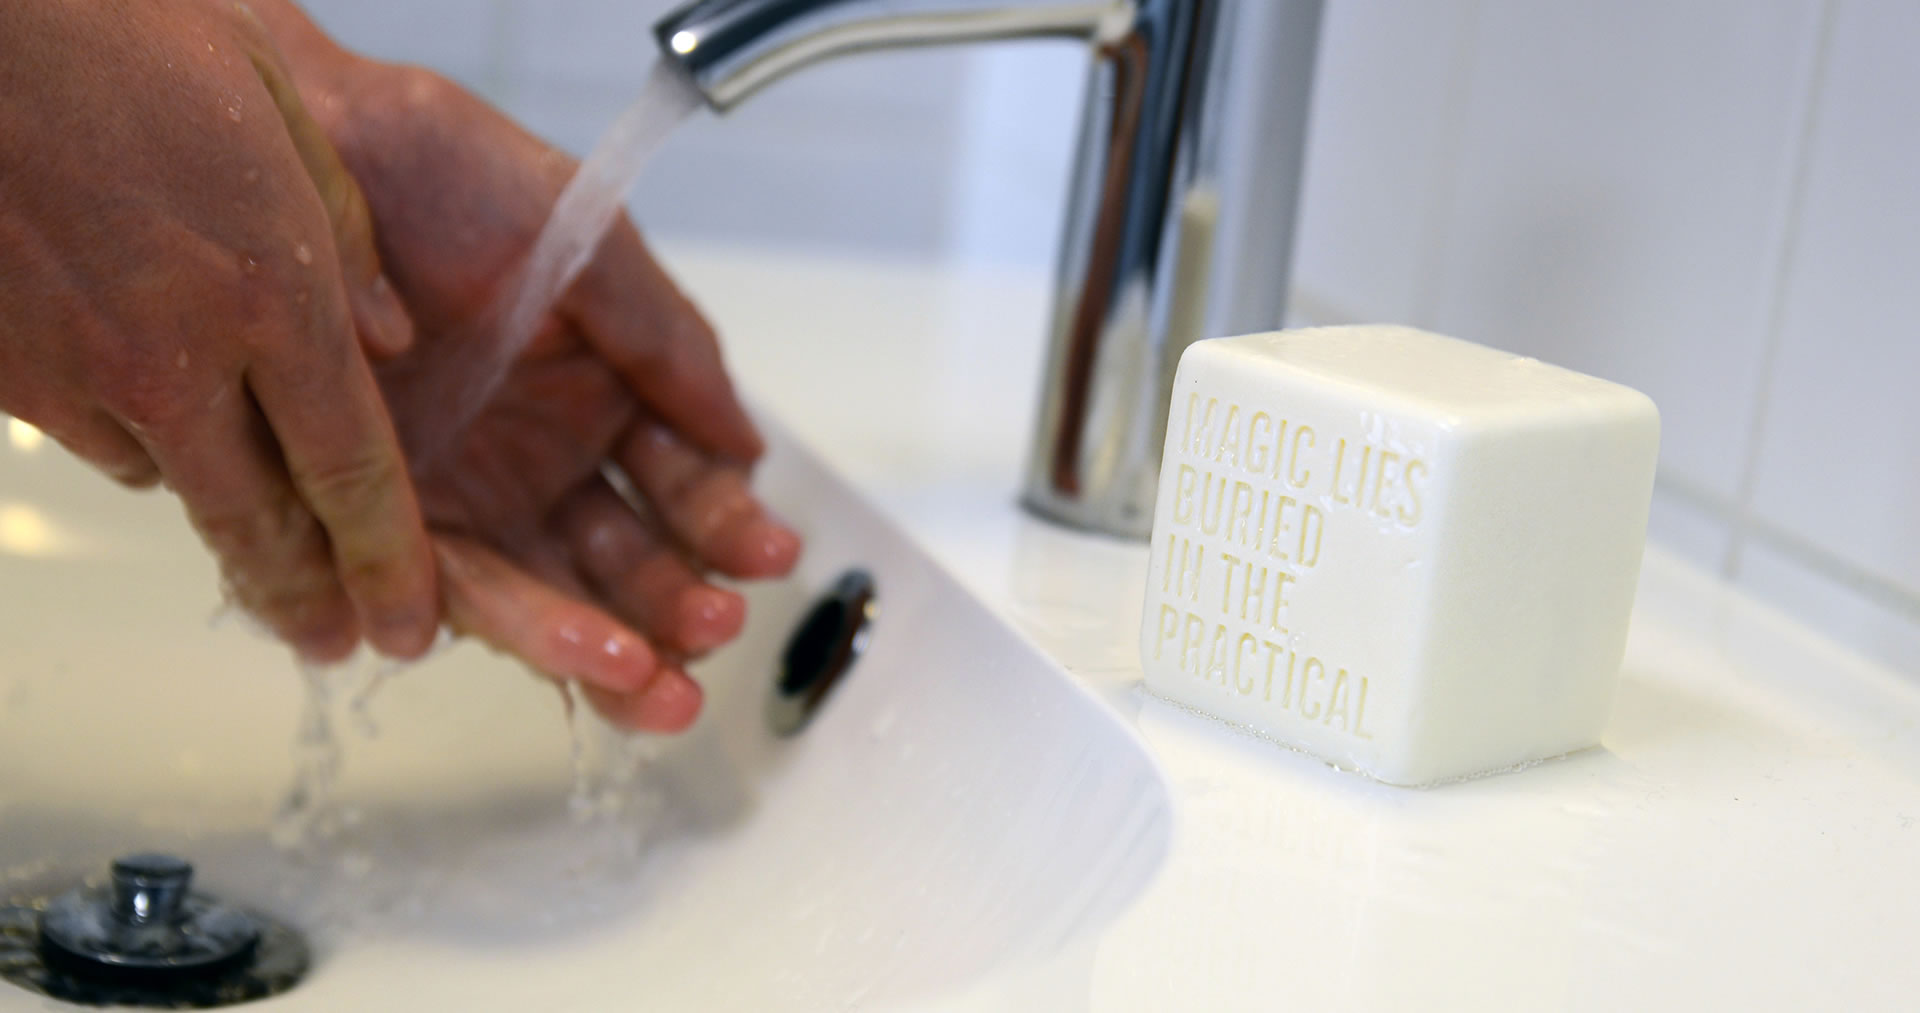 Nonobject soap corporate gift on the sink